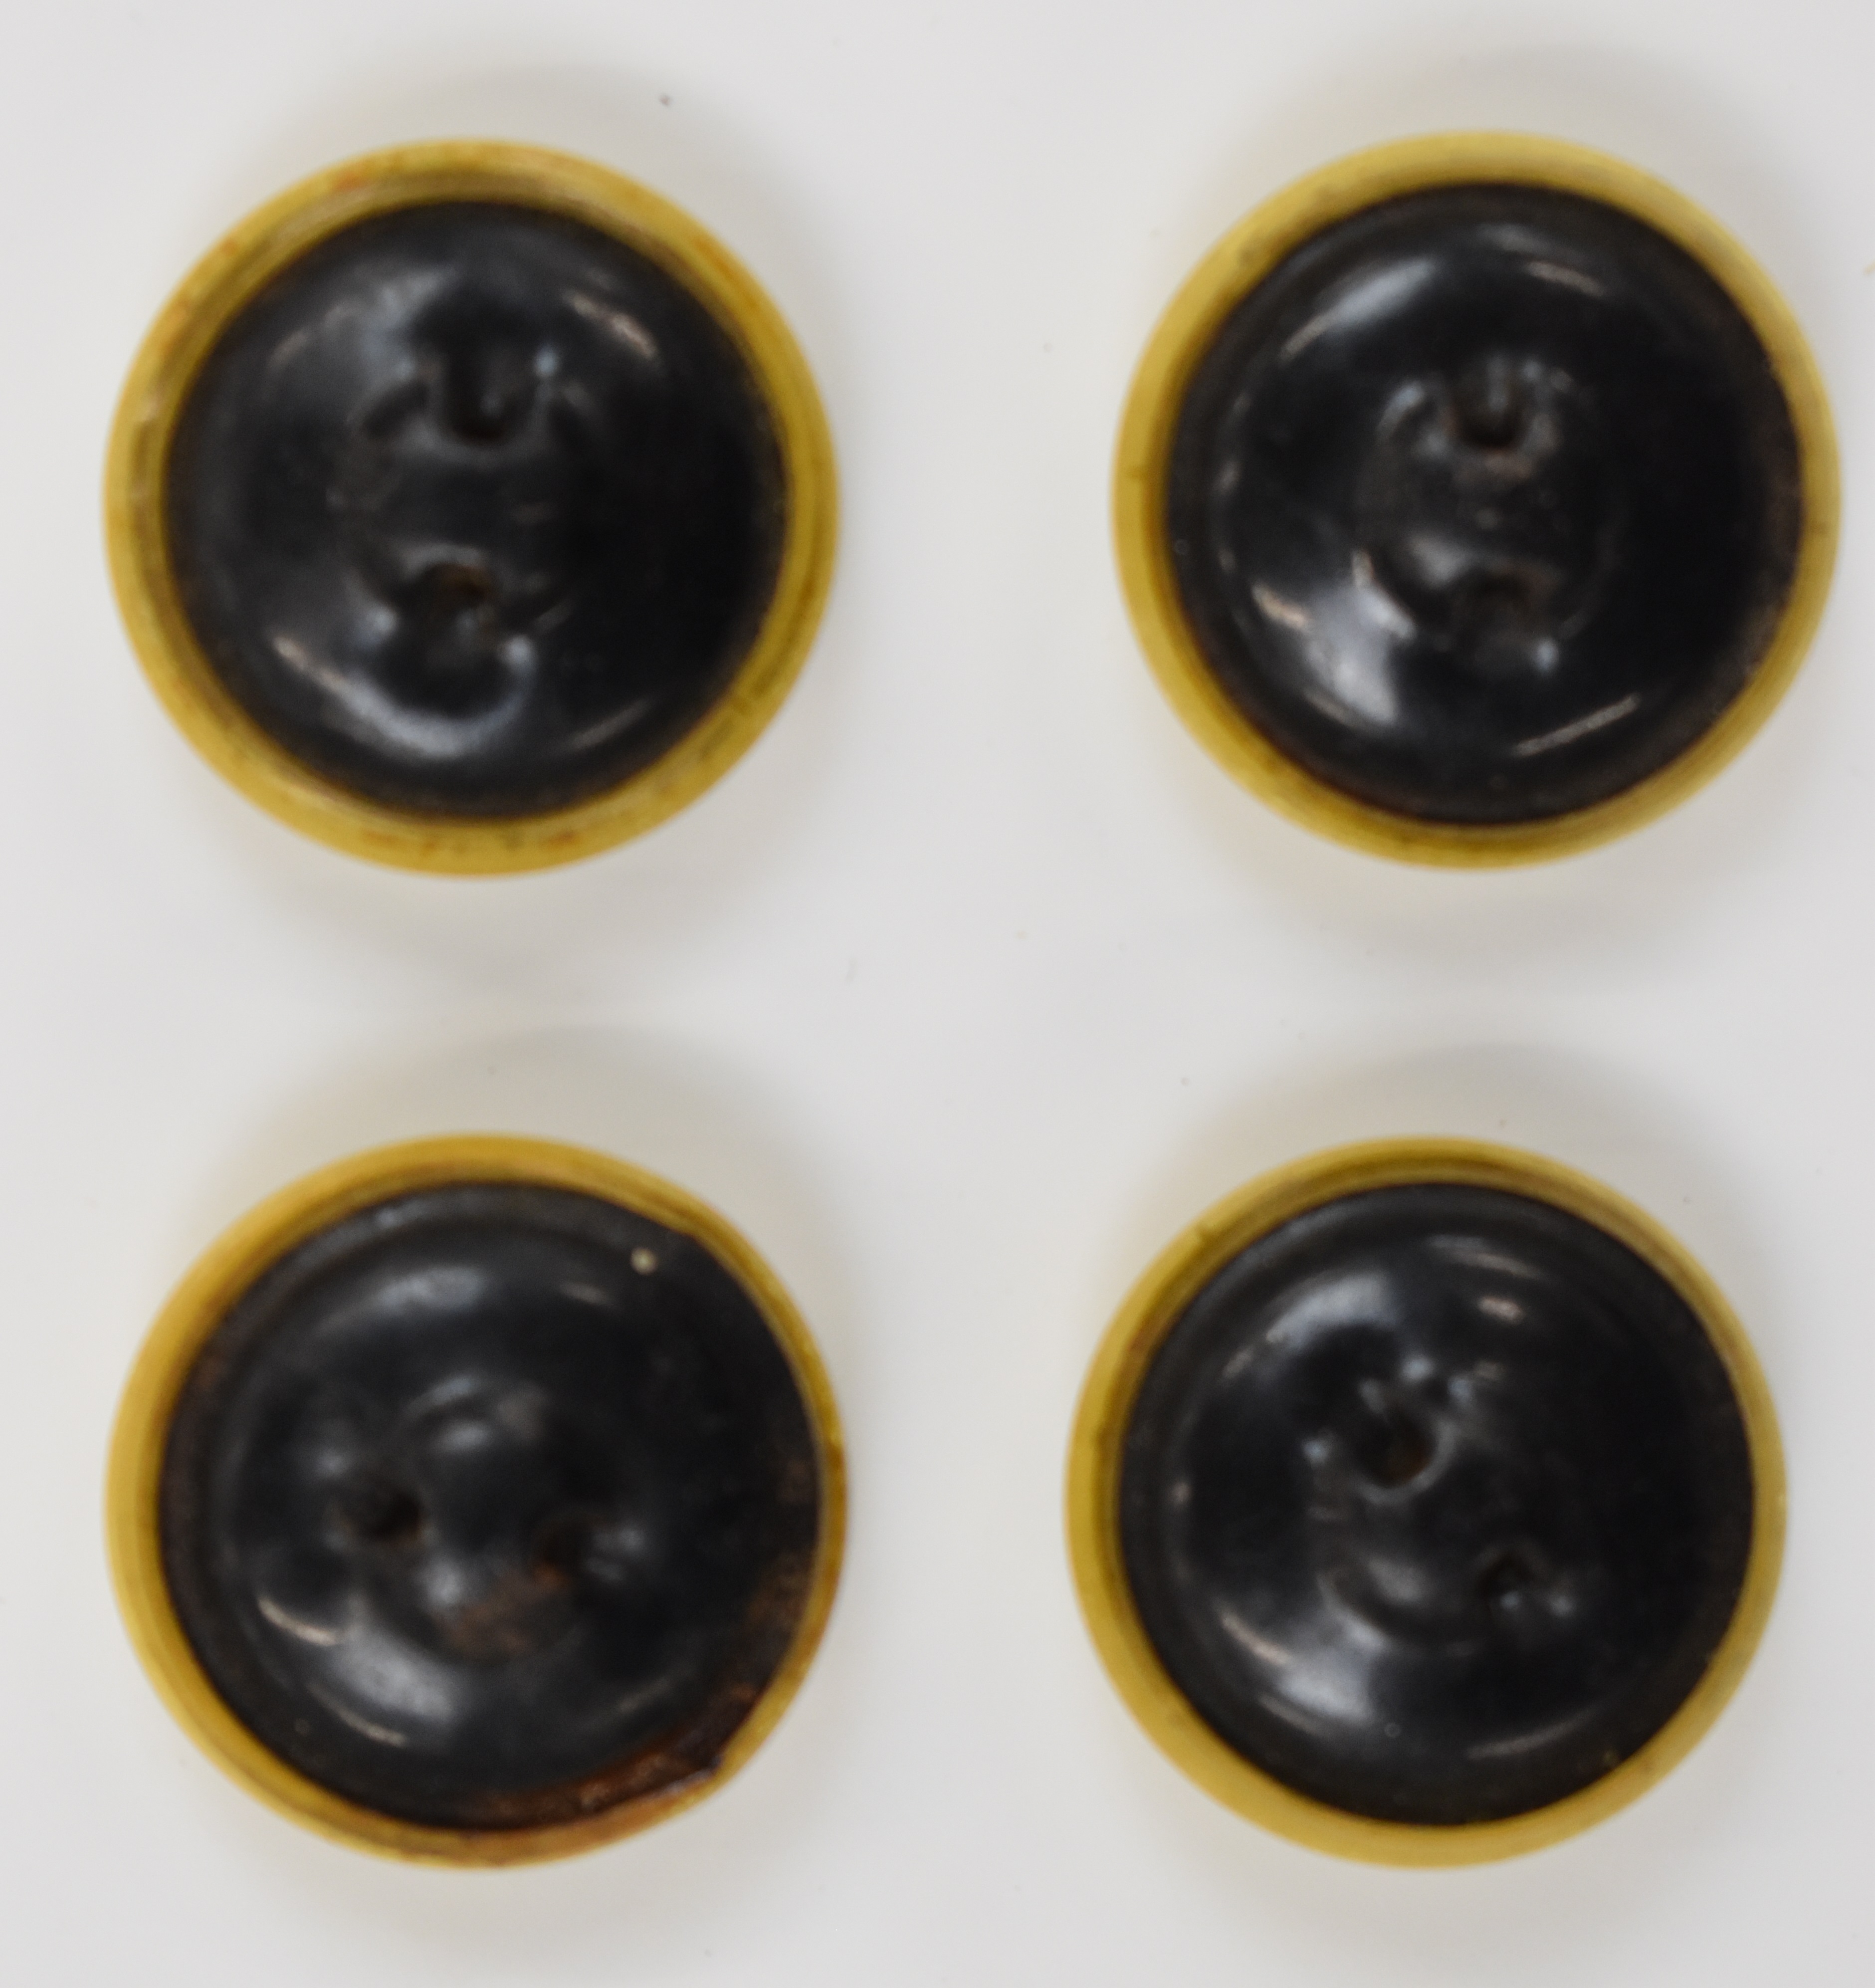 German WW2 Nazi Third Reich set of four plastic / similar buttons with Nazi emblem - Image 2 of 2